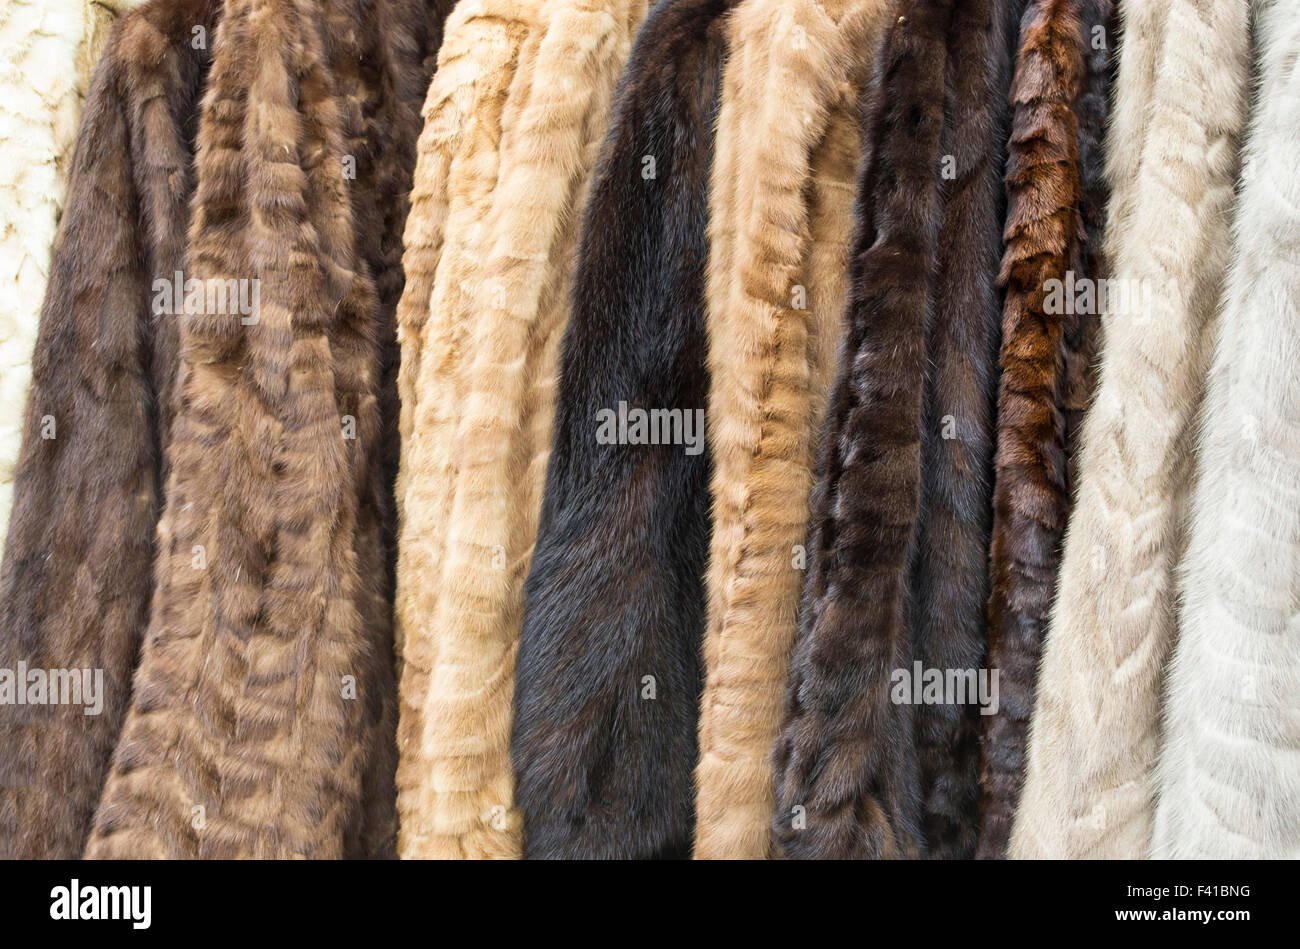 Women's fur coats on display of different colors aligned forming a background Stock Photo